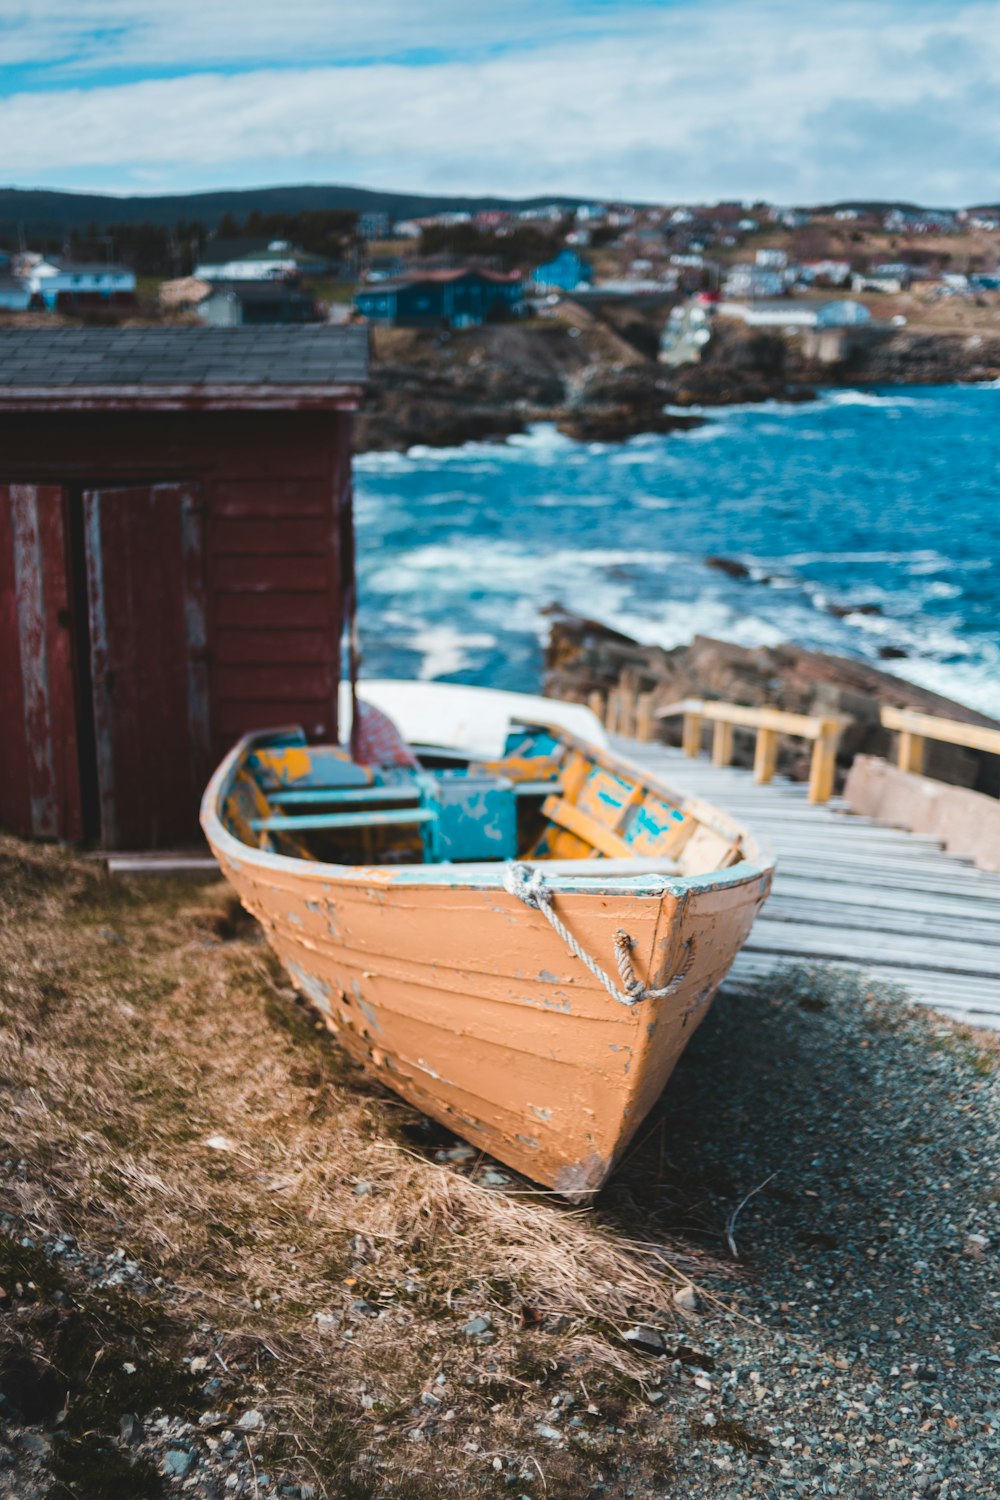 brown and white boat on seashore during daytime